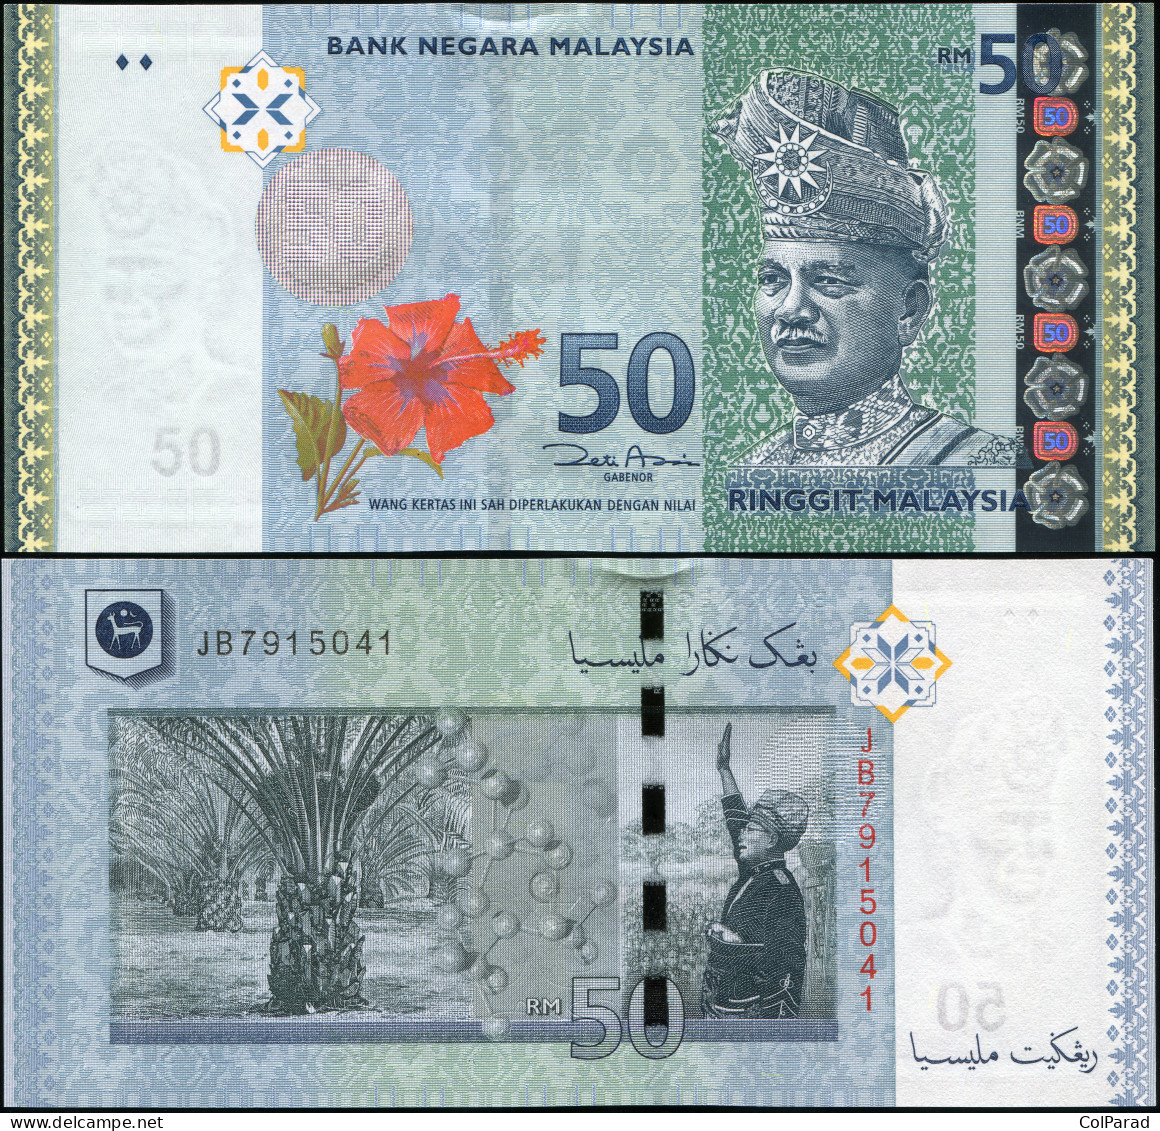 MALAYSIA 50 RINGGIT - ND (2009) - Paper Unc - P.50a Banknote - Malaysie